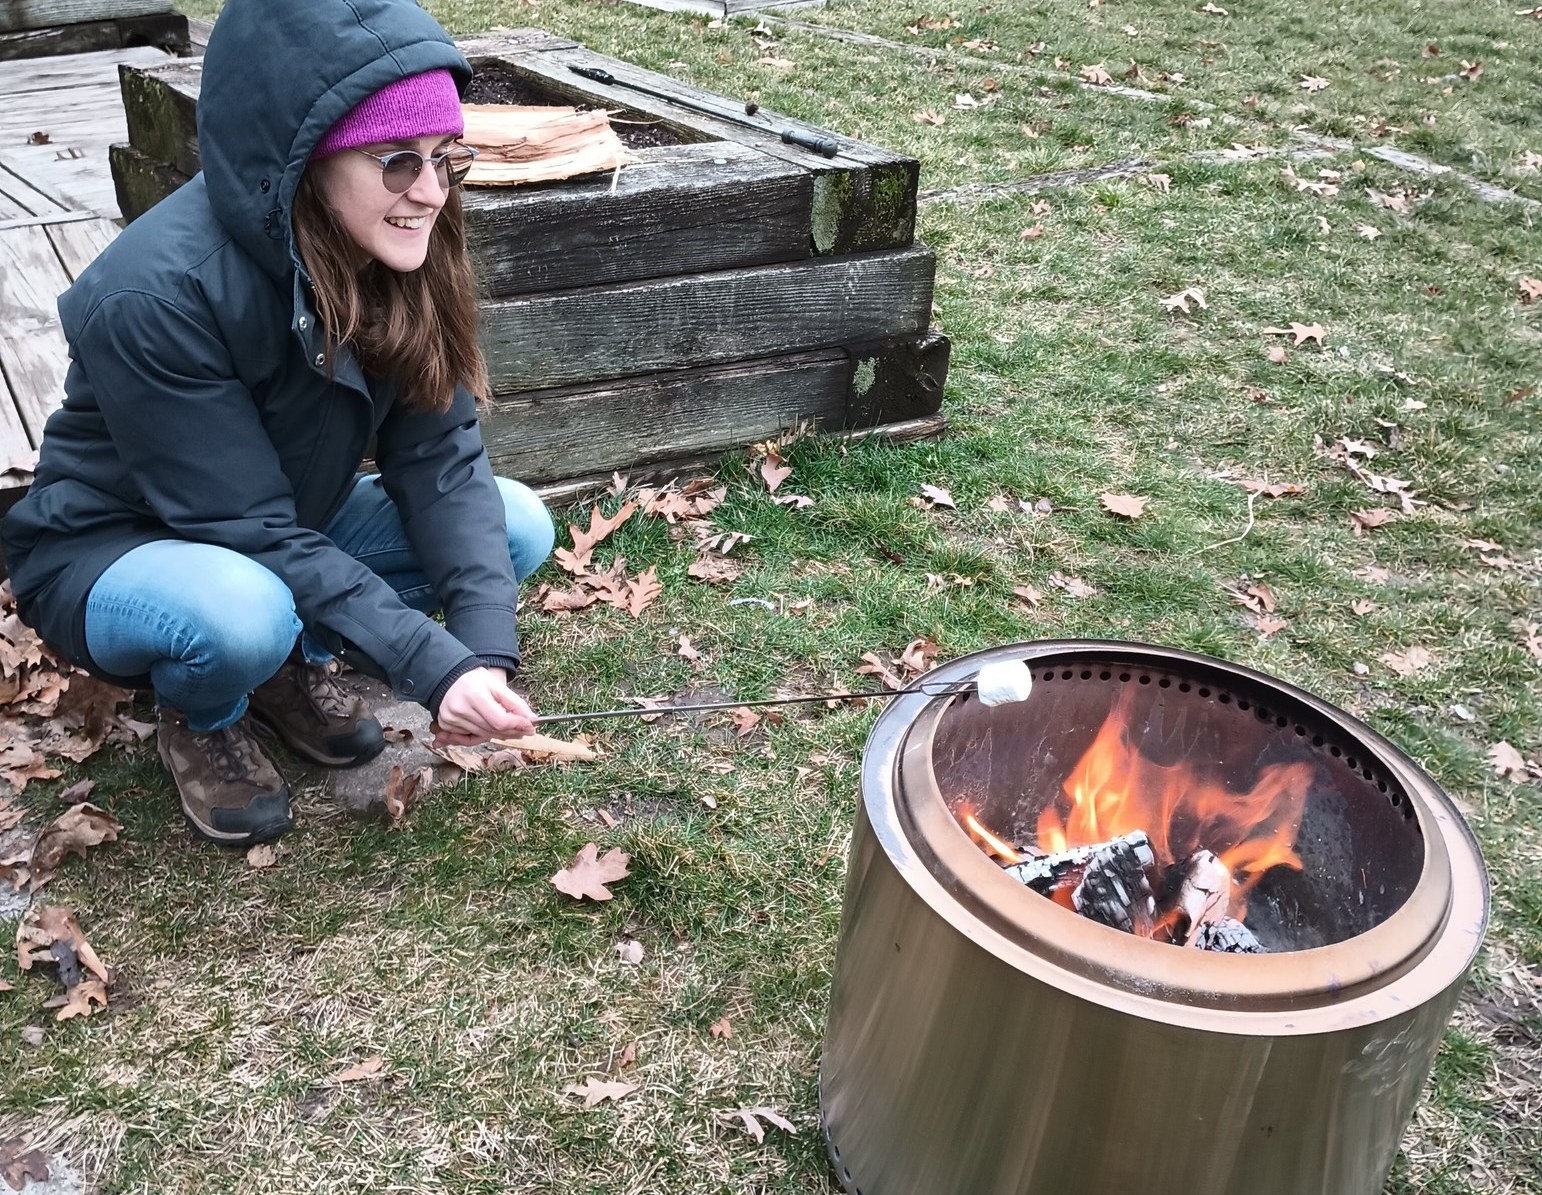 A girl with long hair, purple stocking cap, and gray coat is kneeling near a firepit, roasting a marshmellow.